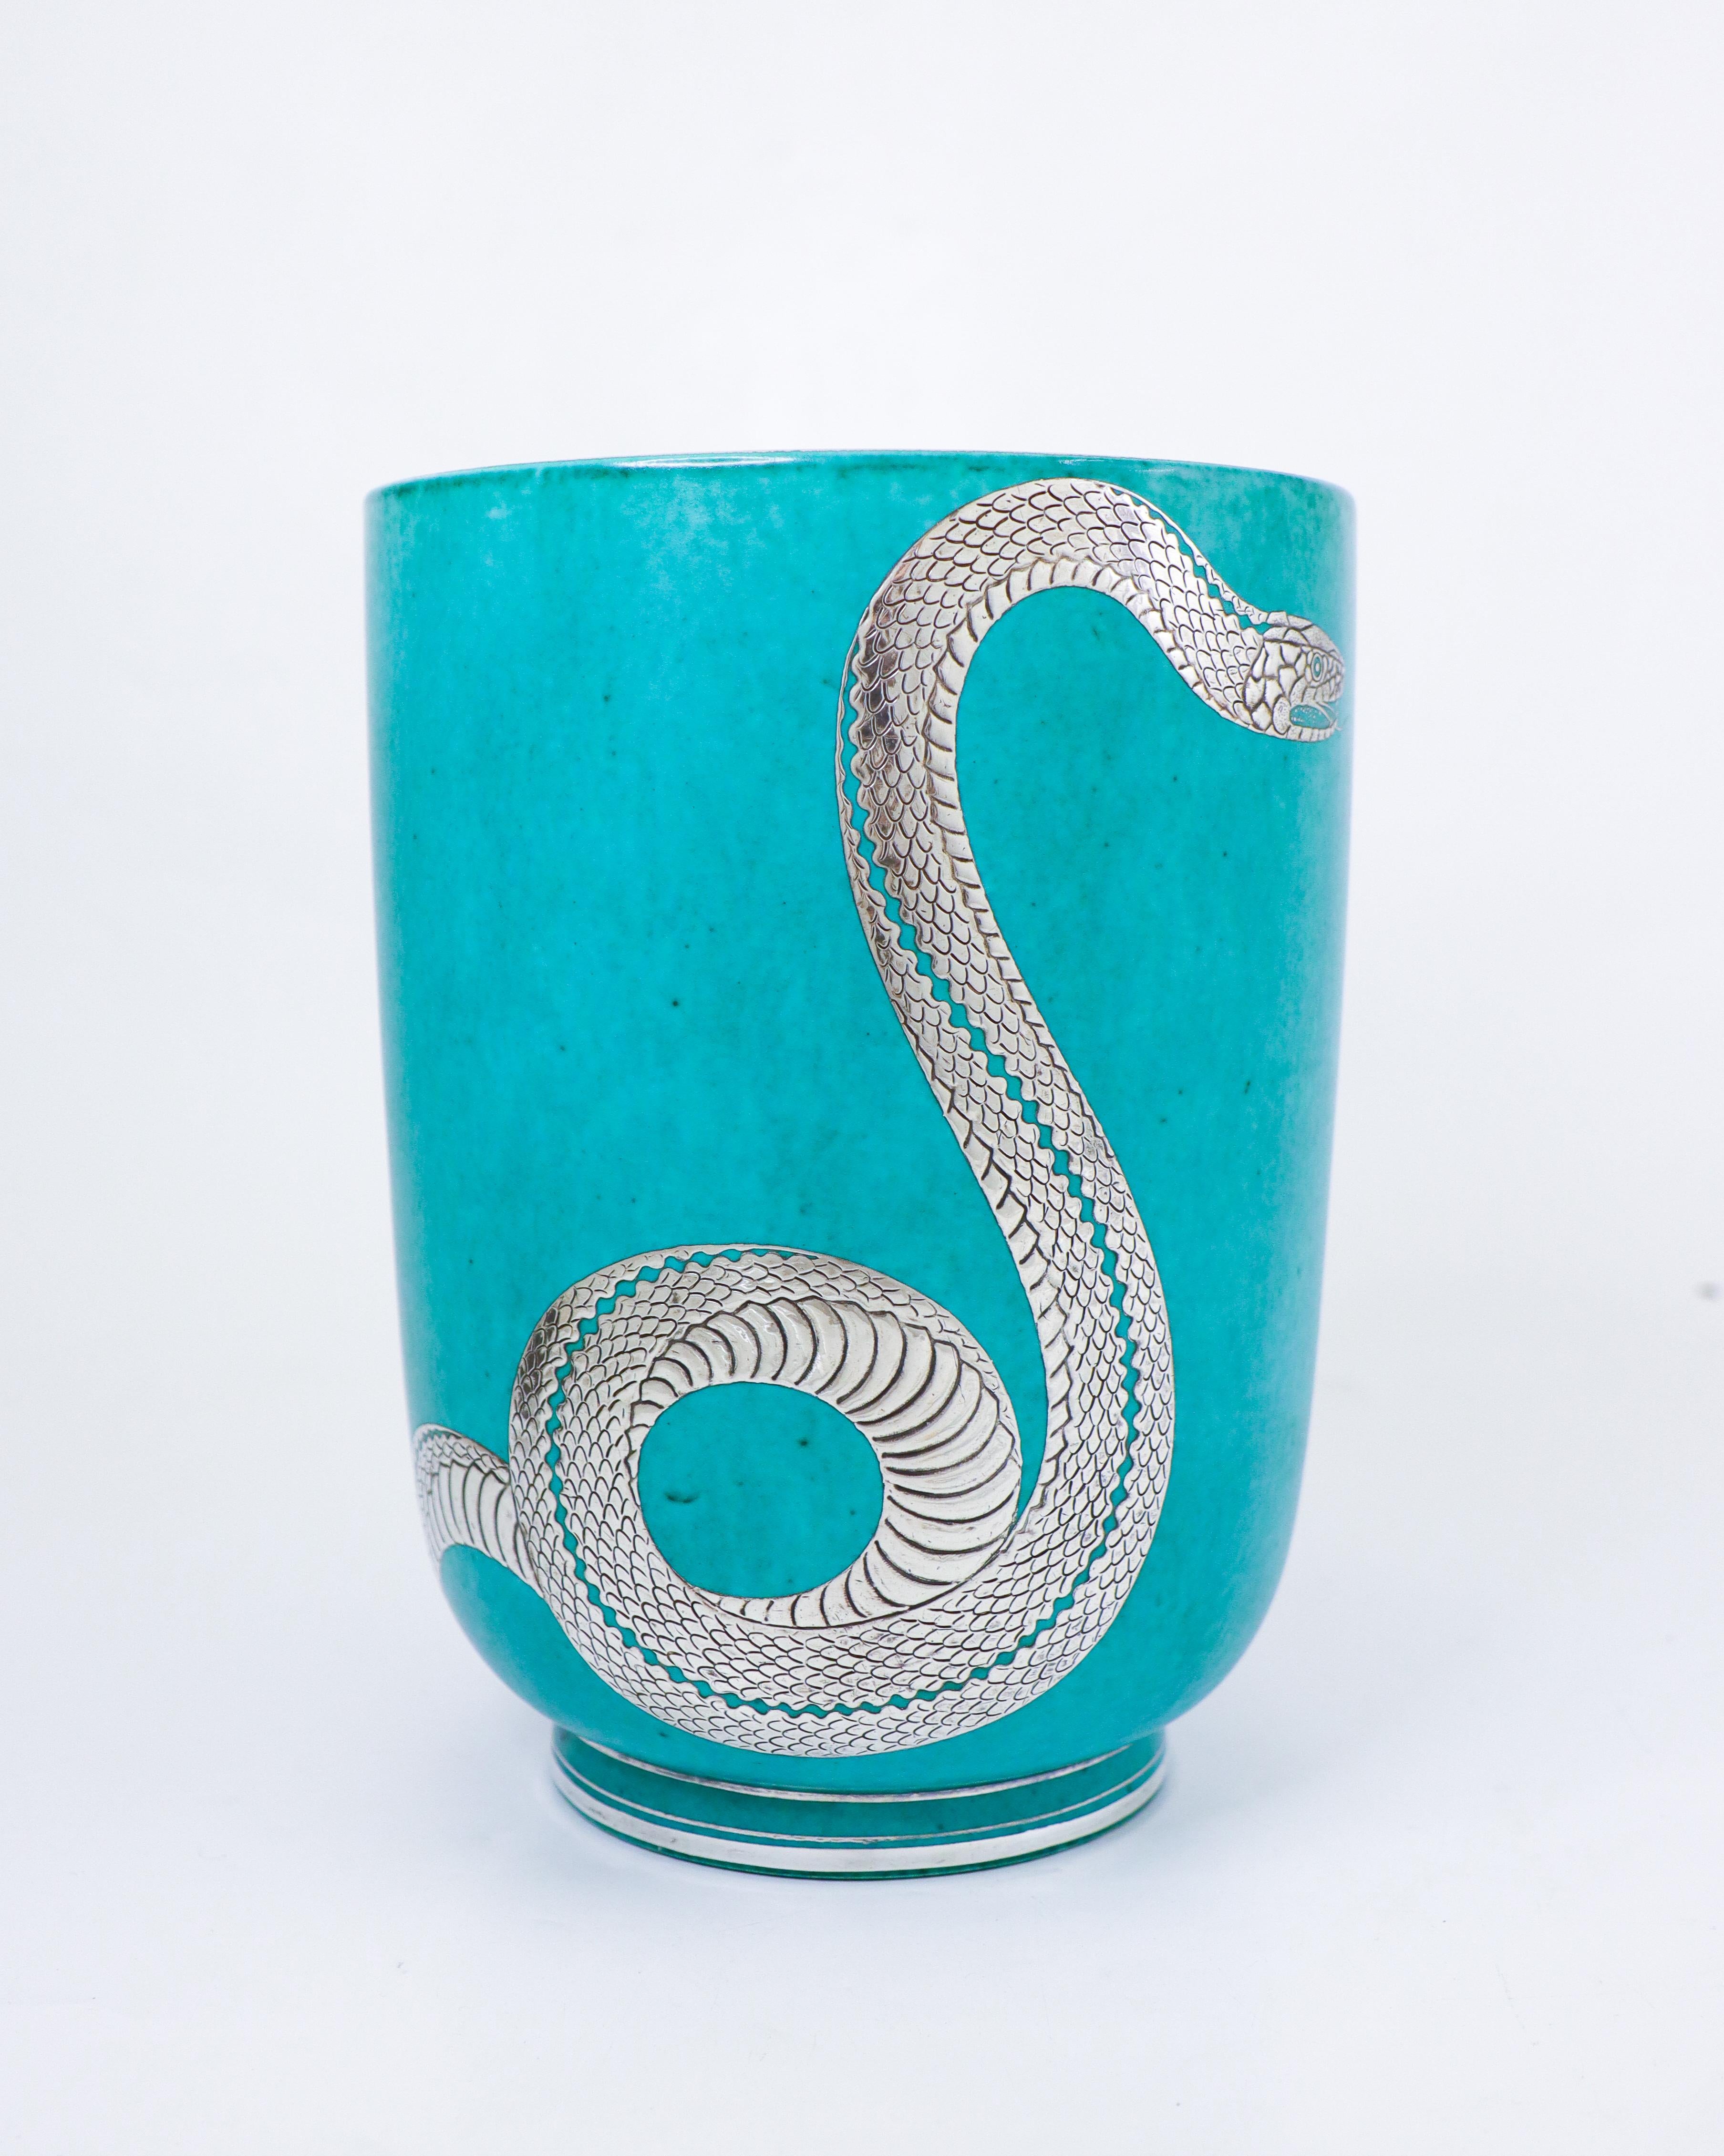 A really rare vase of model Argenta, designed by Wilhelm Kåge at Gustavsberg with silver decor of a snake. The vase is 20,5 cm high and in excellent condition. Marked Argenta and hand turned below.  